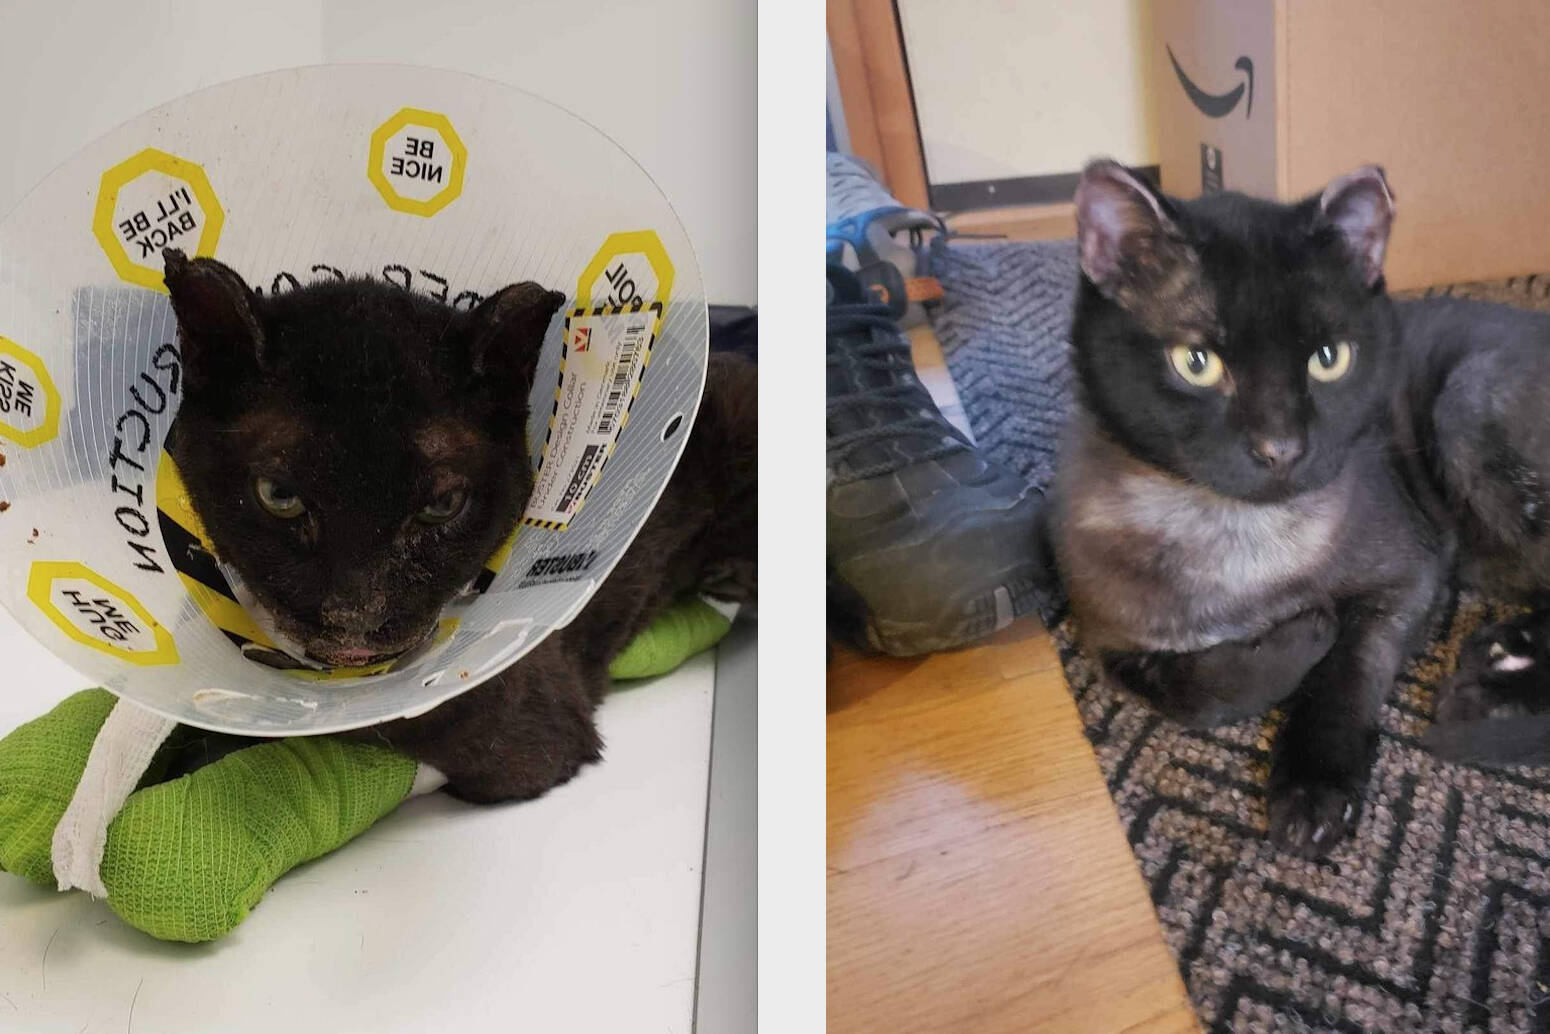 Milo the cat was badly burned and rescued from the McDougall Creek fire and taken to emergency vet care. His vet fell in love with him and when he was surrendered, the vet took him in. (ALERT Facebook)